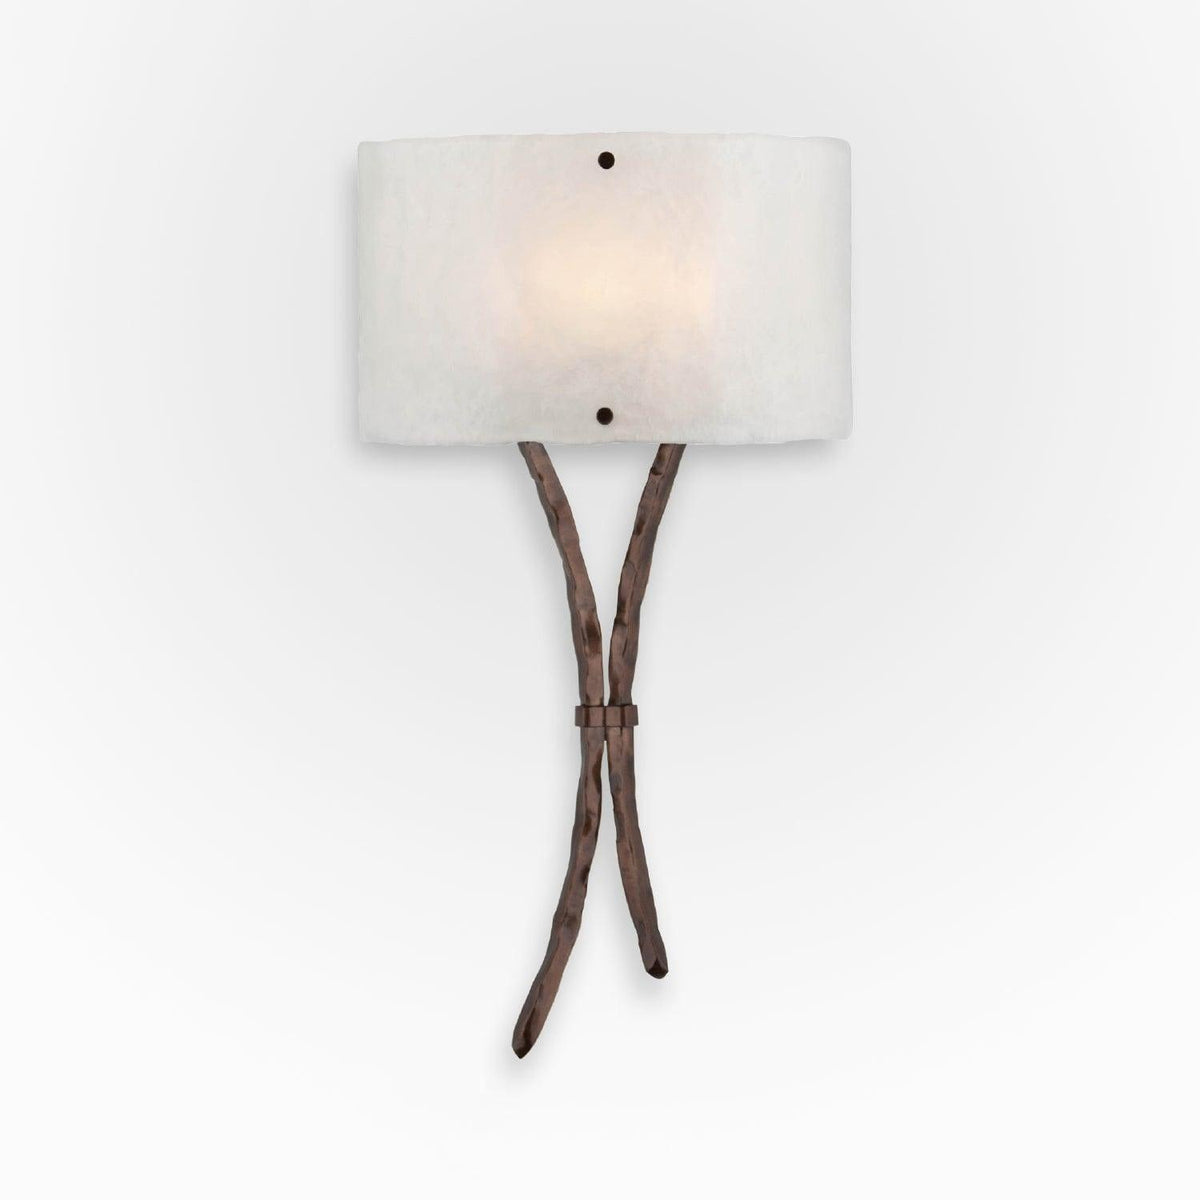 Hammerton Studio - Ironwood Sprout Cover Sconce - CSB0032-0B-RB-FG-E2 | Montreal Lighting & Hardware